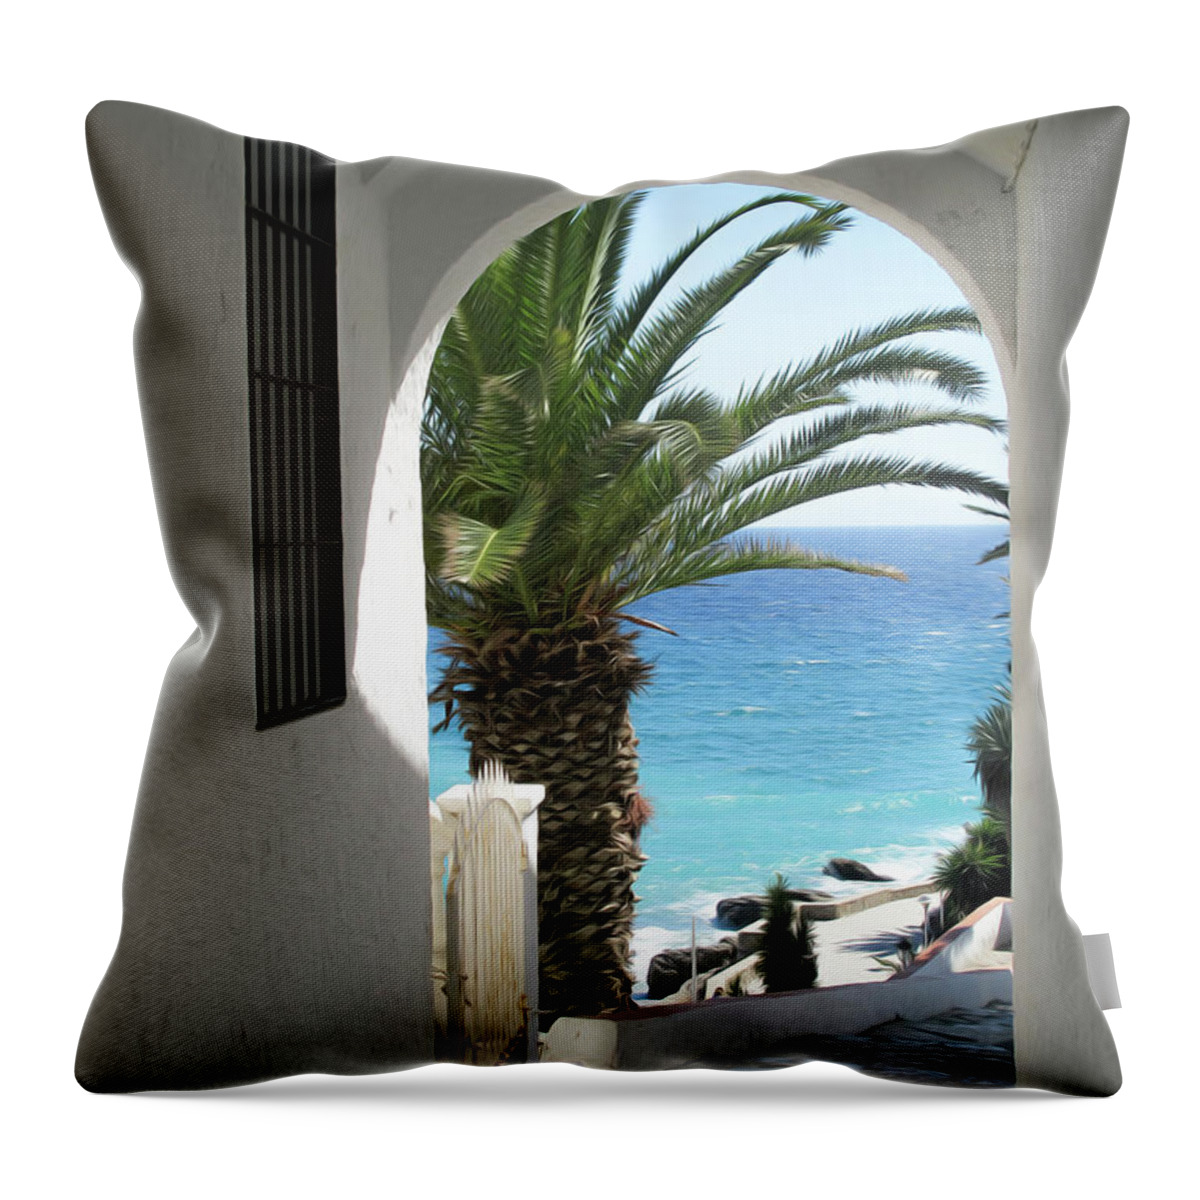 Spain Throw Pillow featuring the digital art Path to the beach in Nerja by Naomi Maya